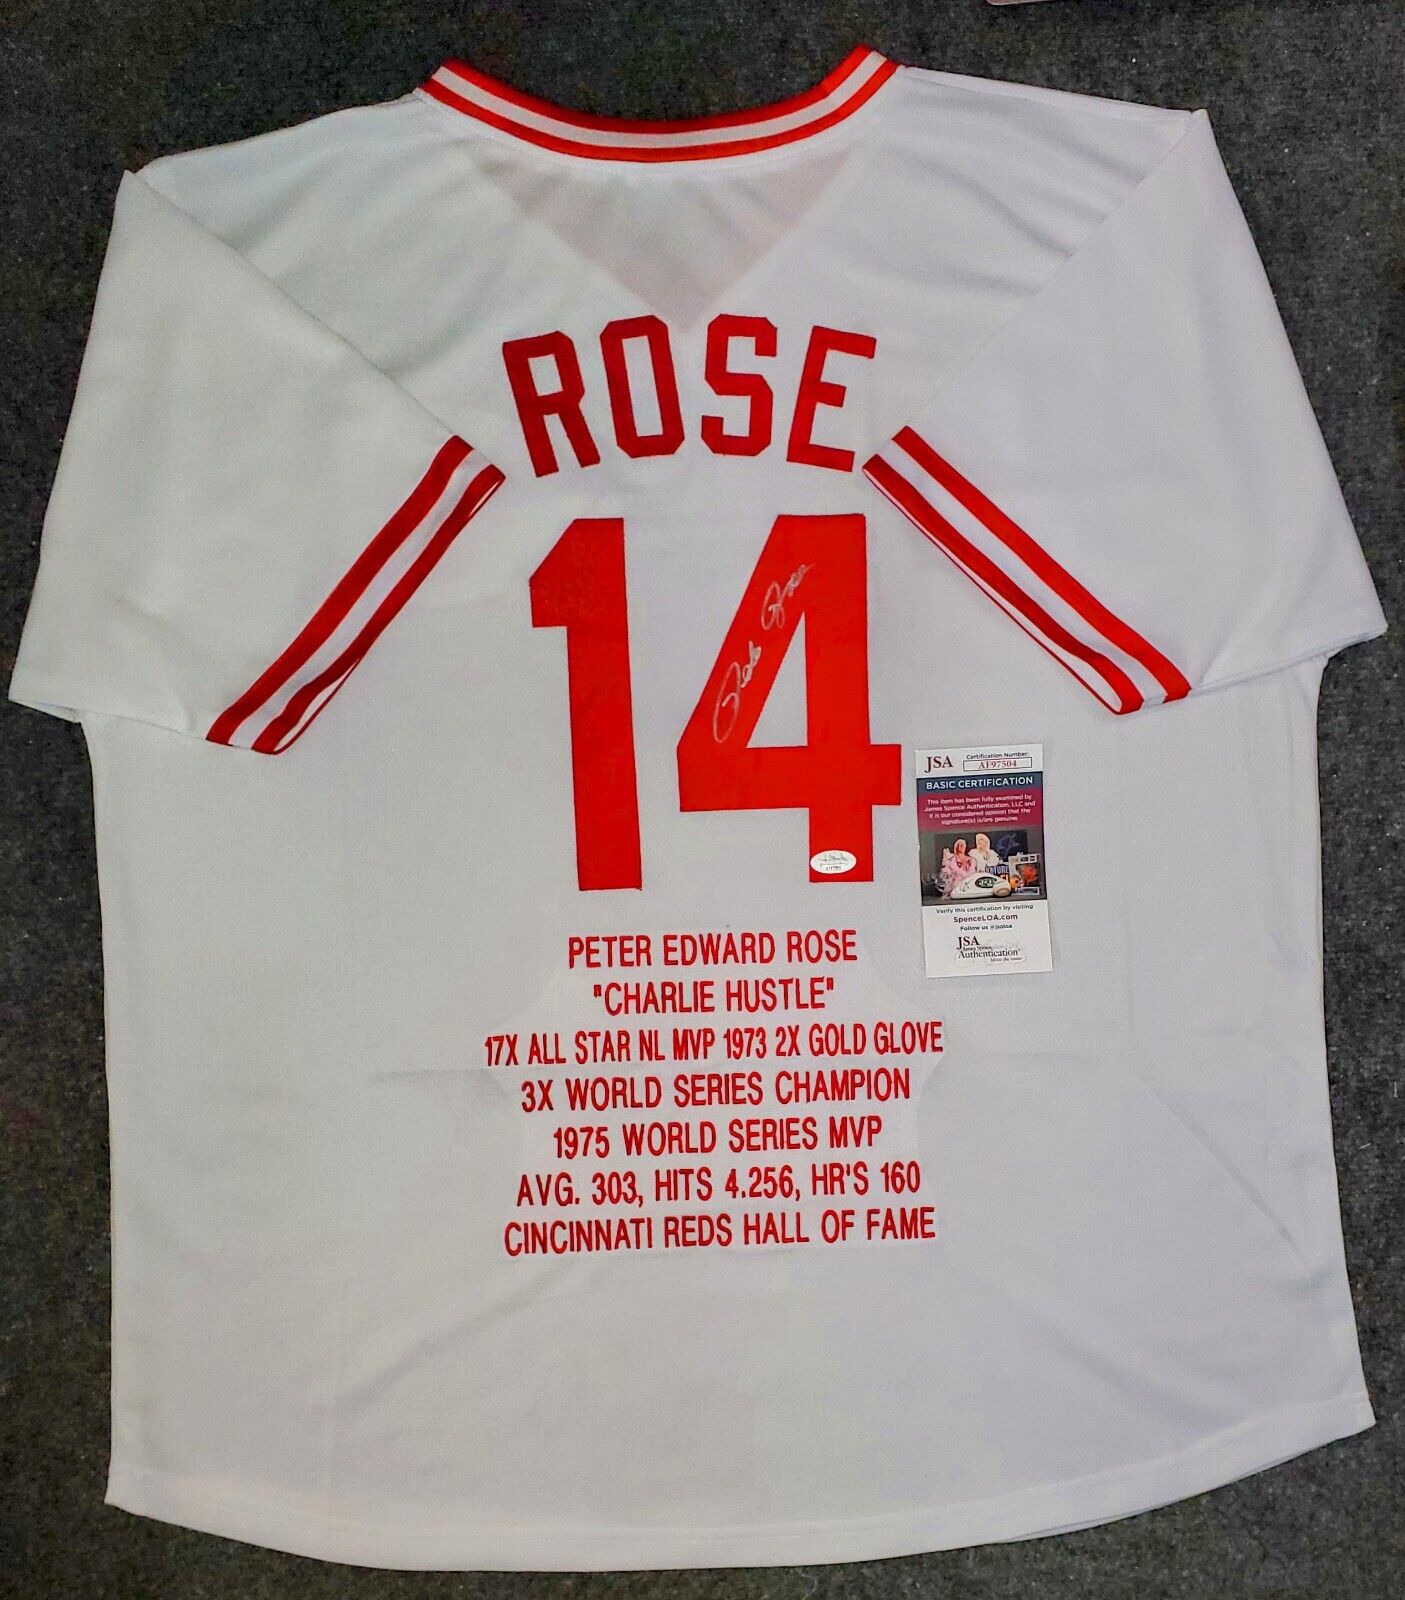 Pete Rose Signed Jersey (Rose)